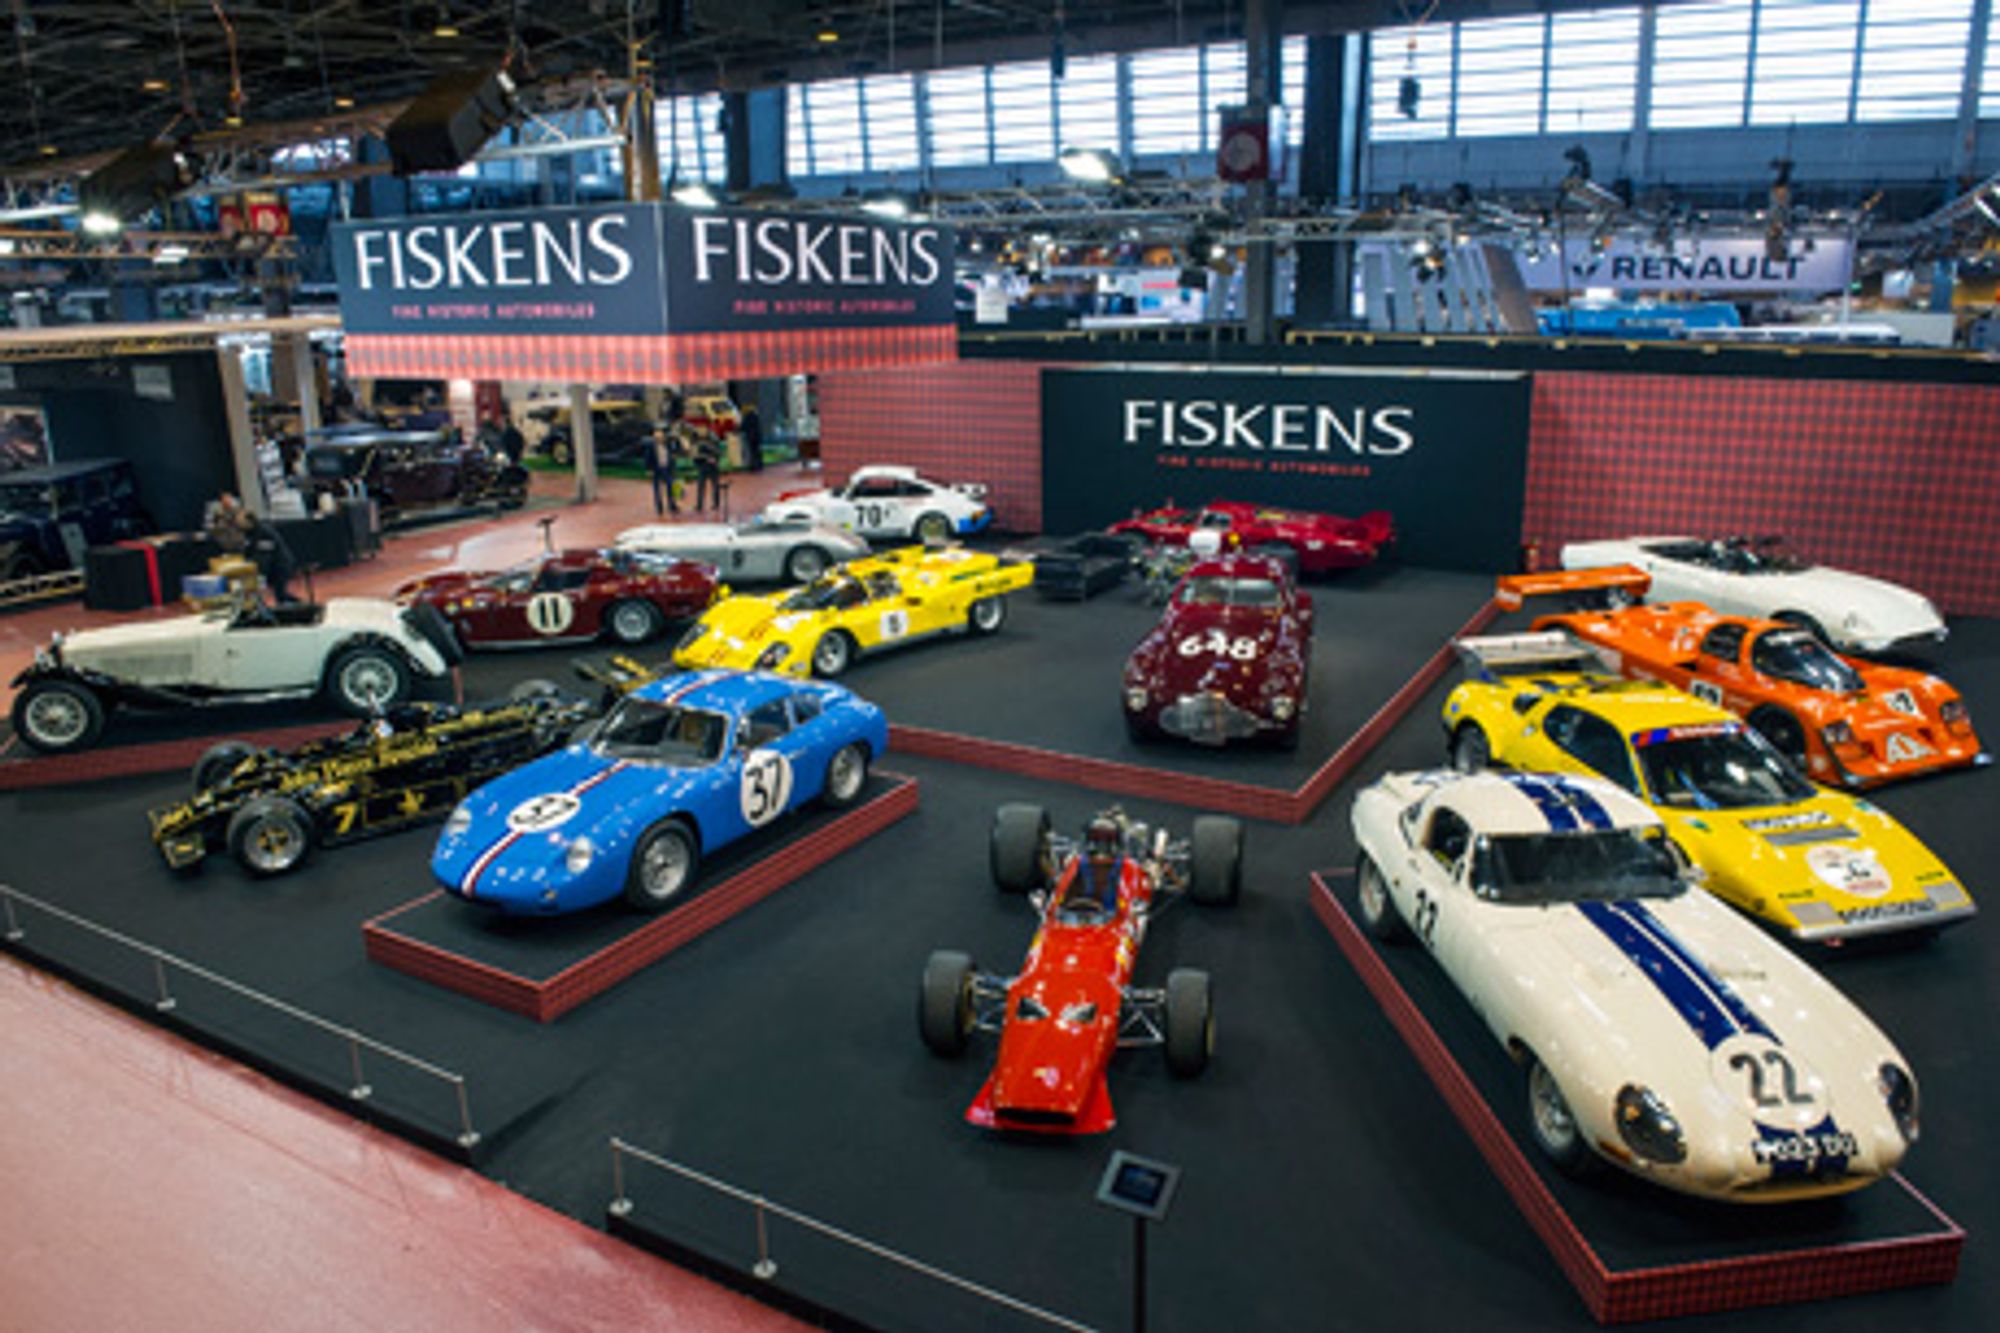 Fiskens reveals its stunning new Rétromobile collection